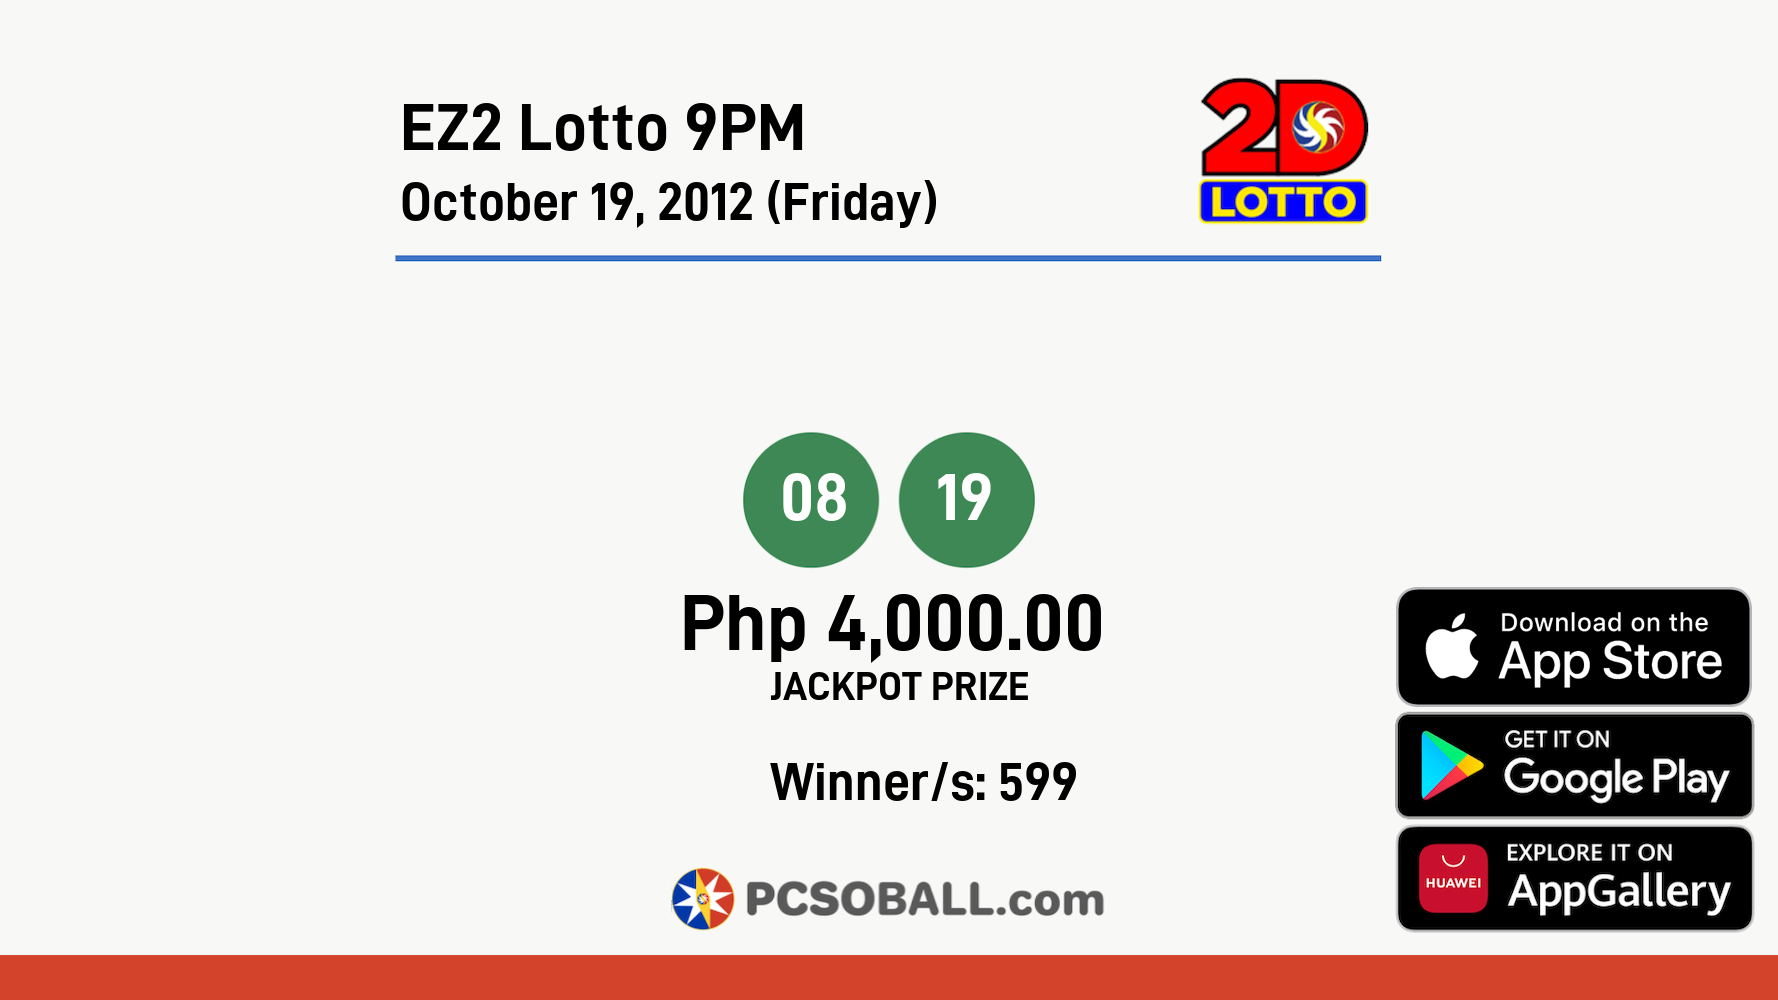 EZ2 Lotto 9PM October 19, 2012 (Friday) Result